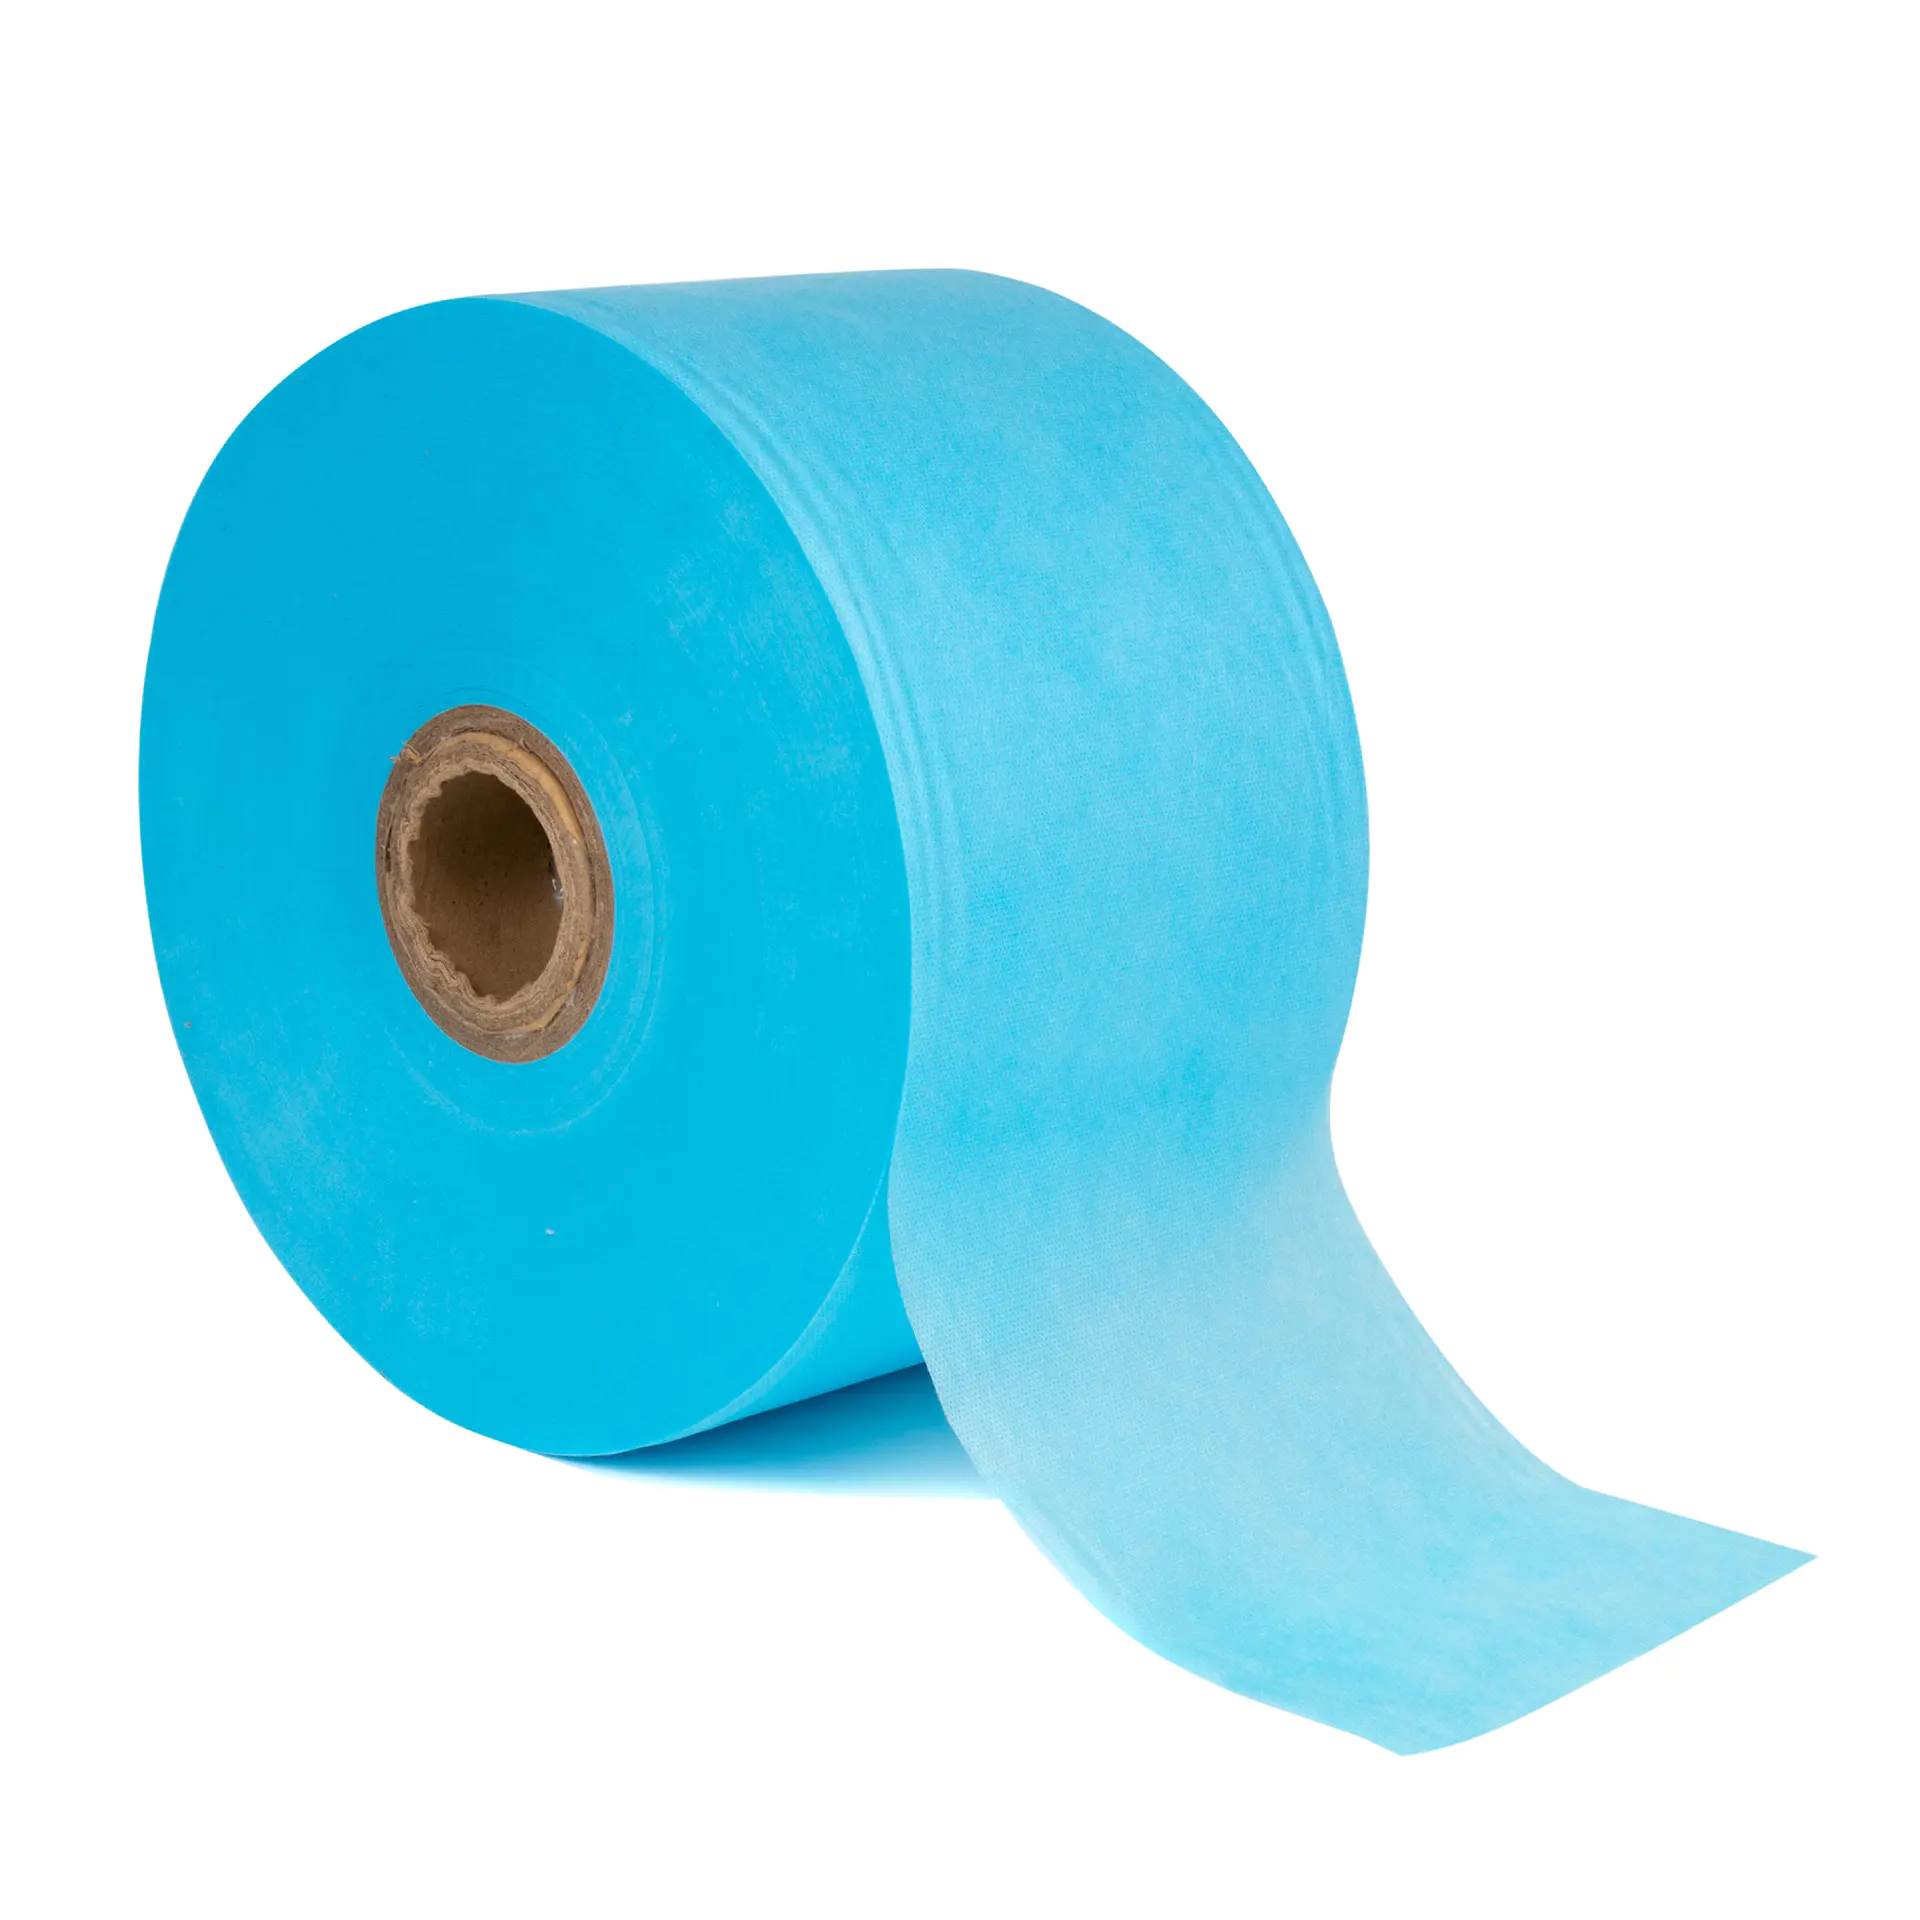 High Quality S/SS/SSS 100 PP Medical Nonwoven Fabric